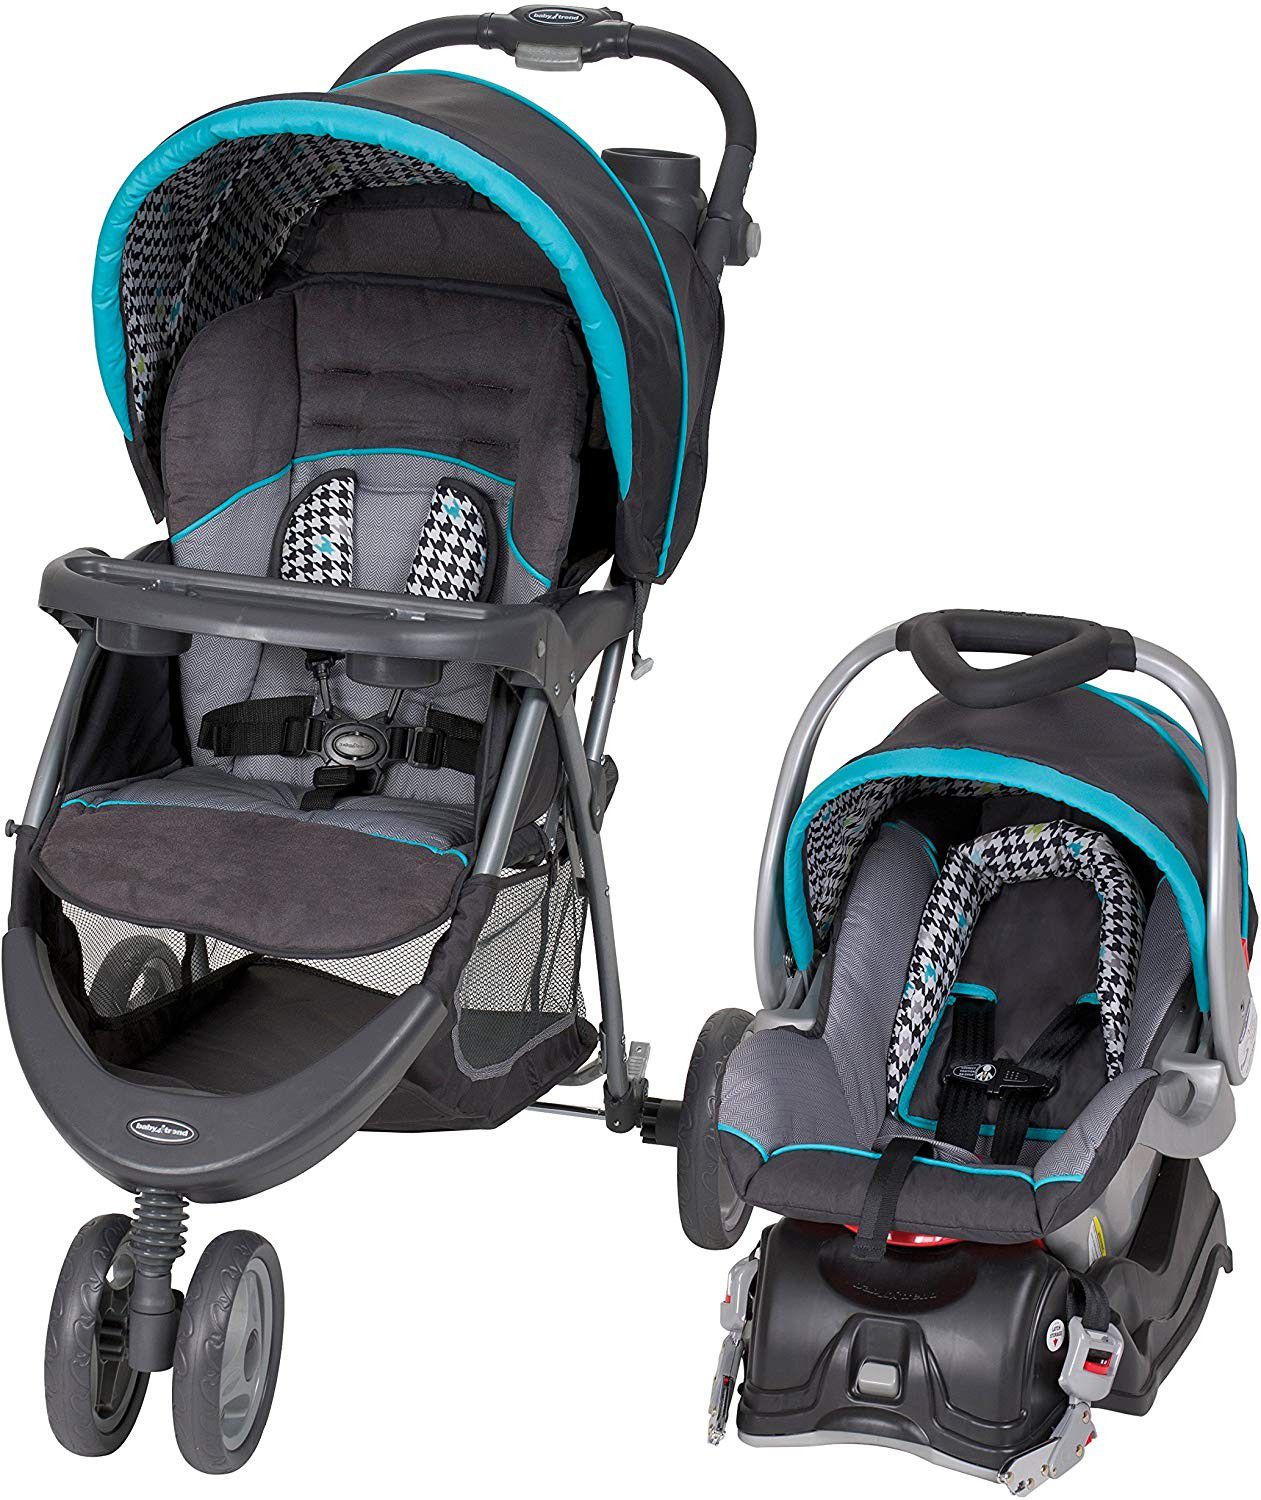 Baby trend stroller and carseat